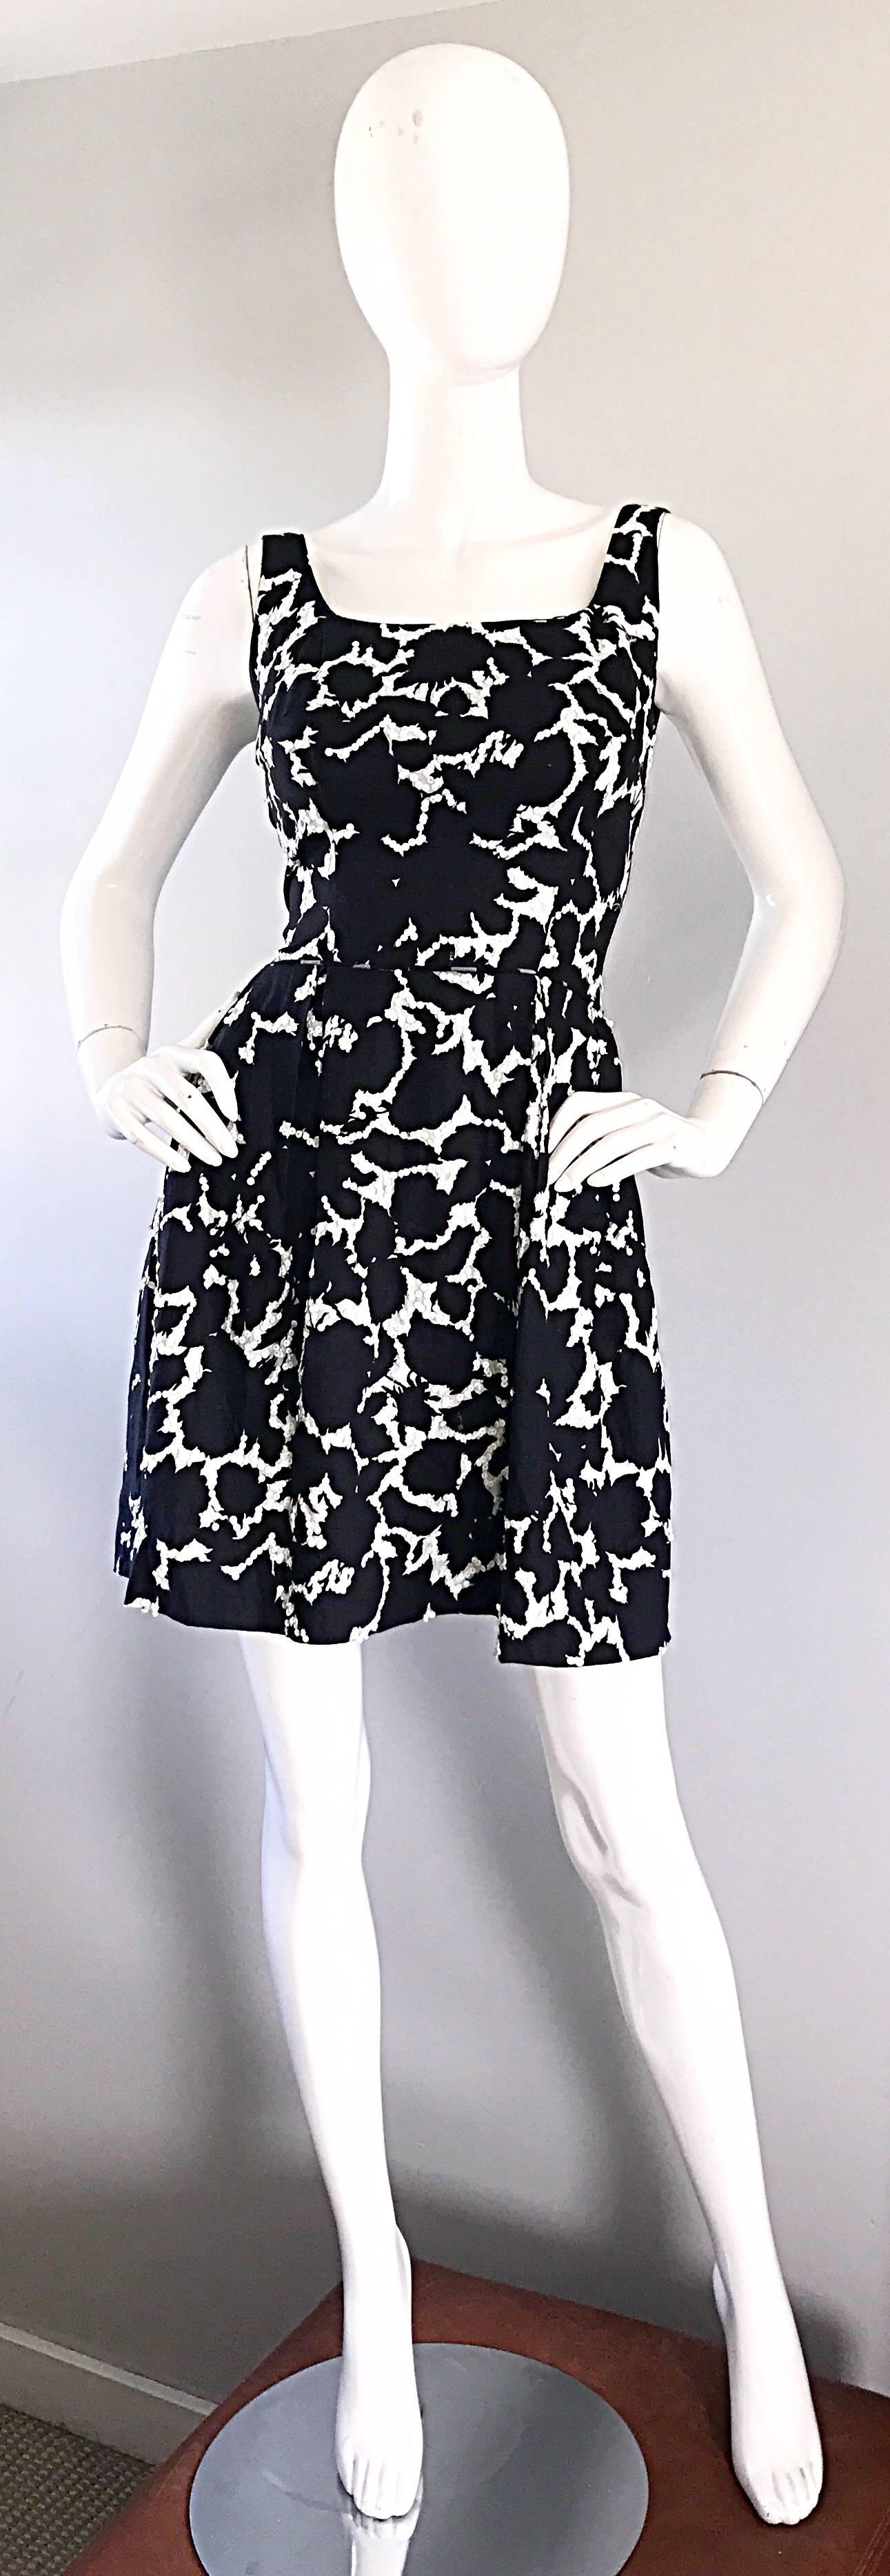 Beautiful vintage 50s black and white leaf print fit n' flare mini dress! Features a white background that is embelished with thousands of hand-sewn white sequins throughout. Fitted tailored bodice with a full skirt. Full metal zipper up the back